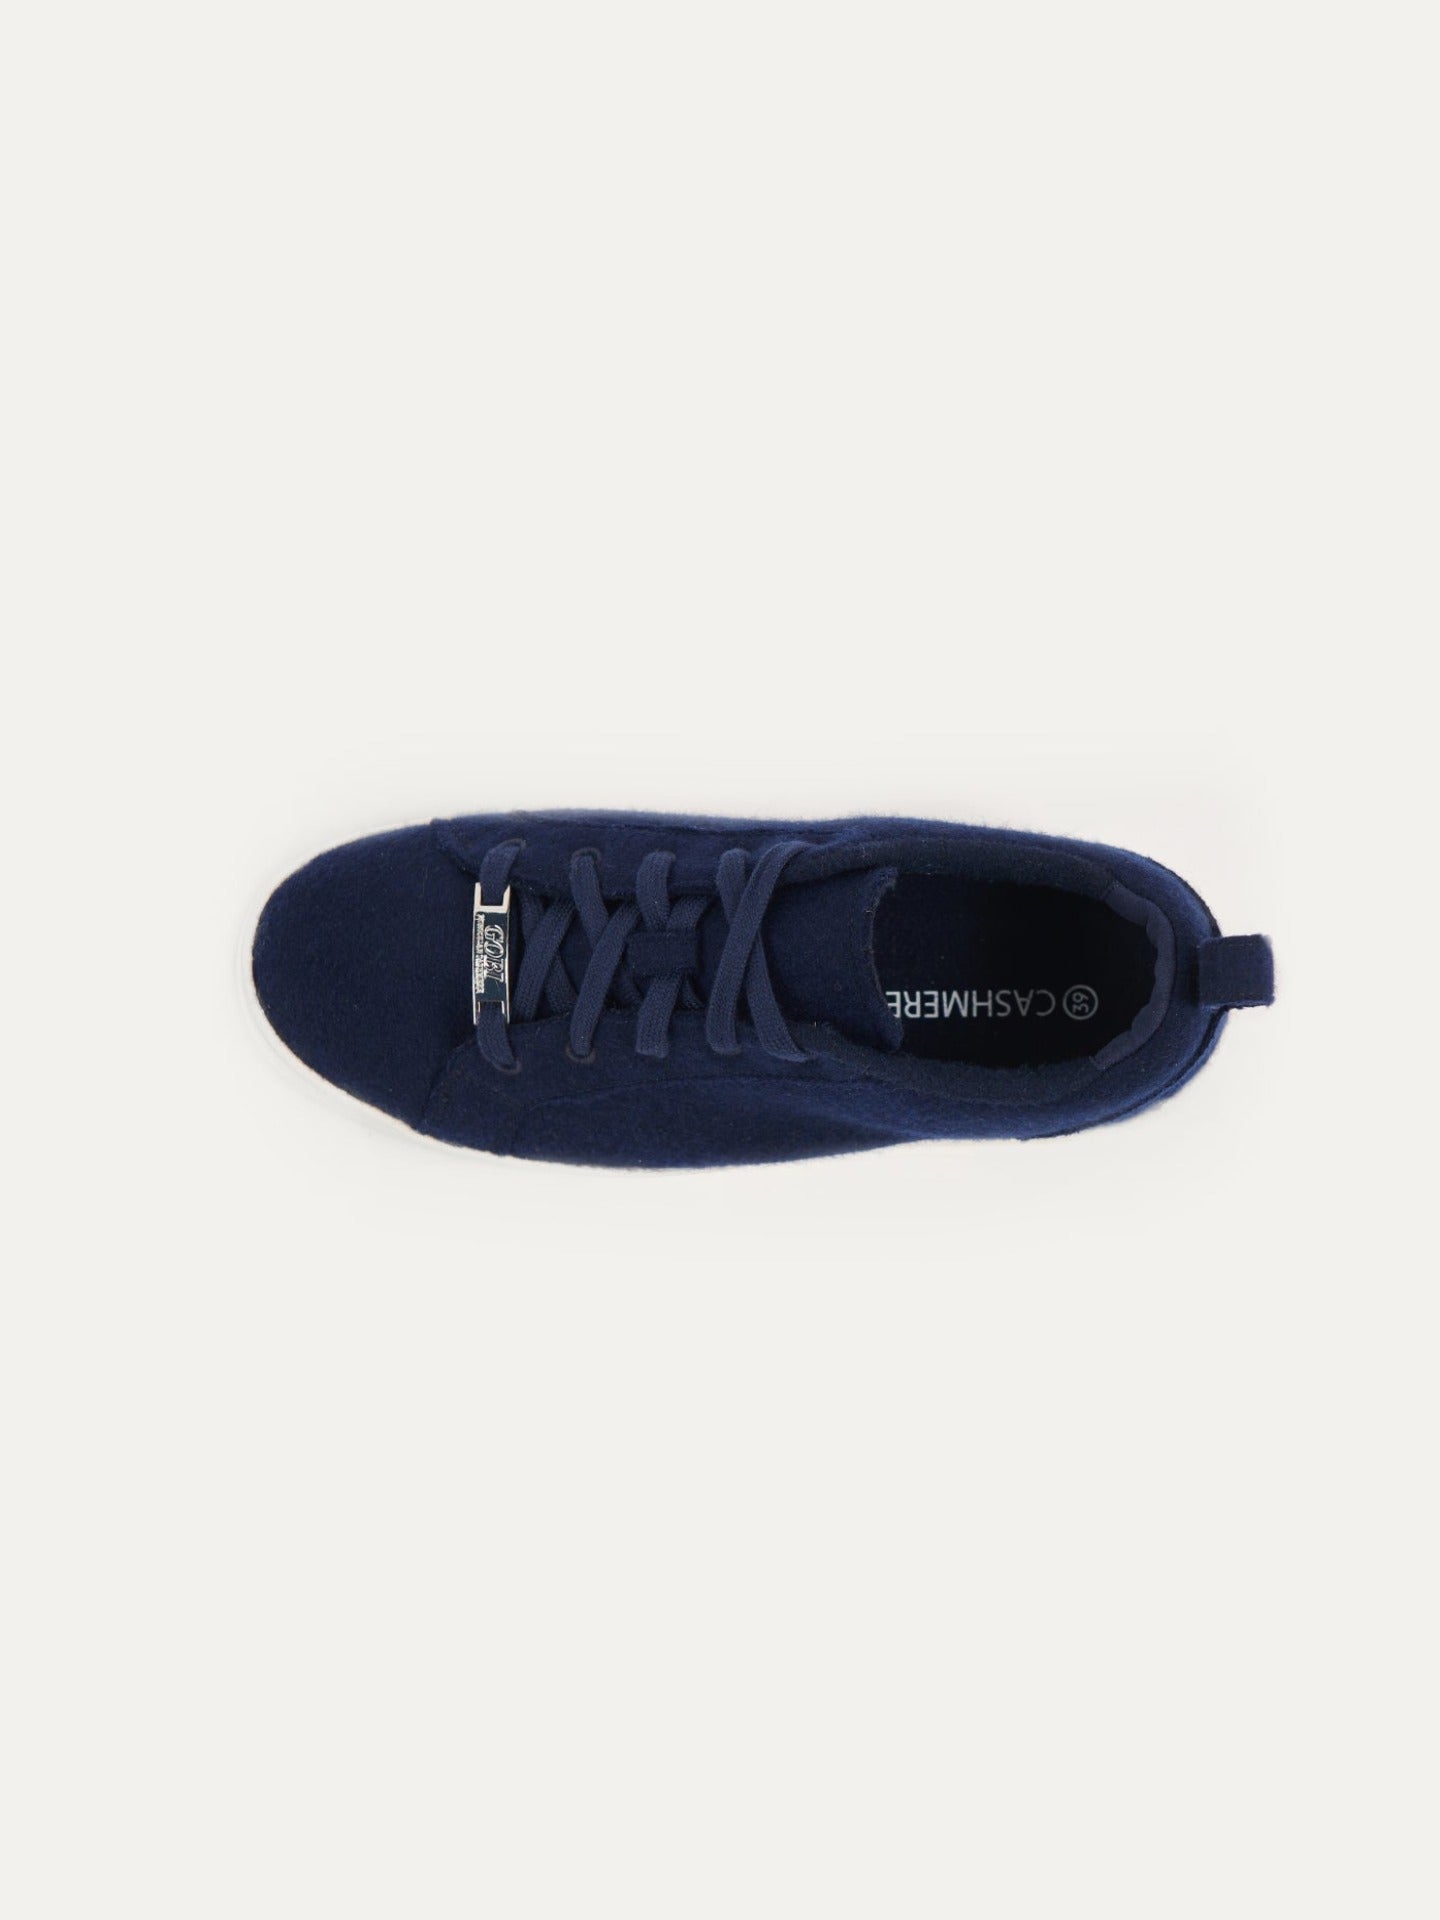 Unisex Cashmere Low Ankle Sneakers Navy - Gobi Cashmere